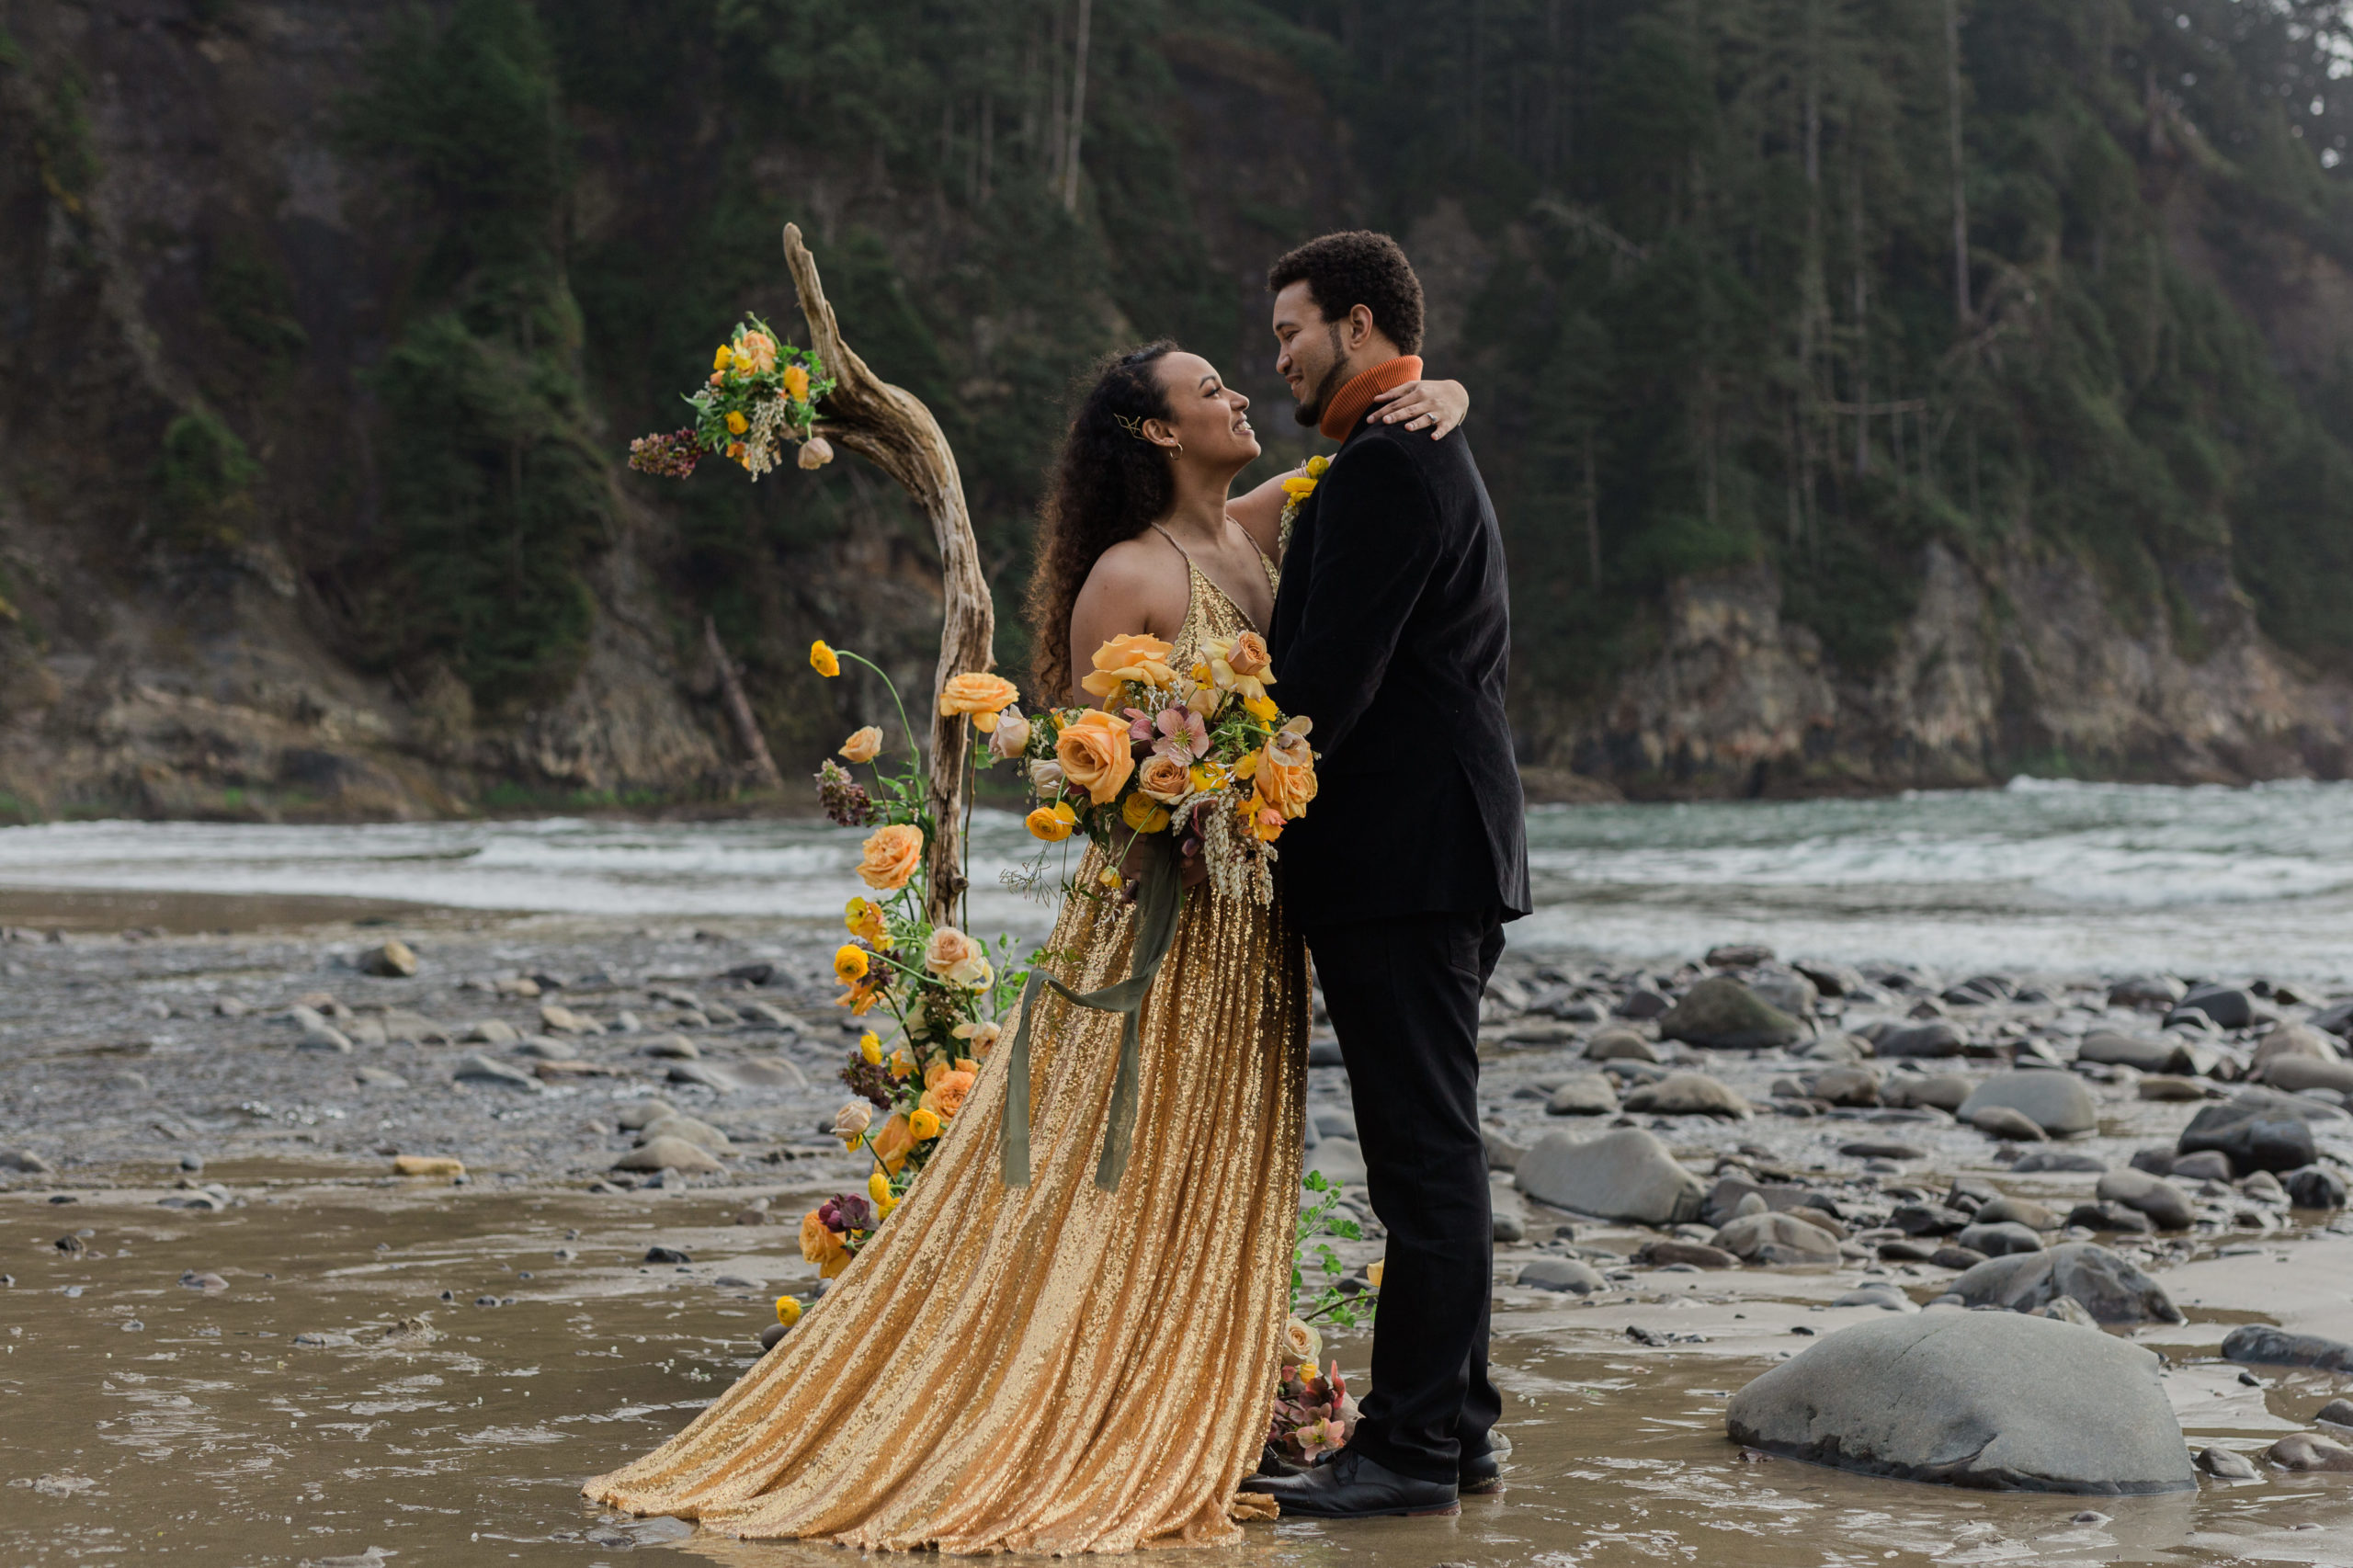 A bride wearing a gold wedding dress is wrapping her hands around her partner in the coast of Oregon. The bride is holding a bouquet on her other hand.